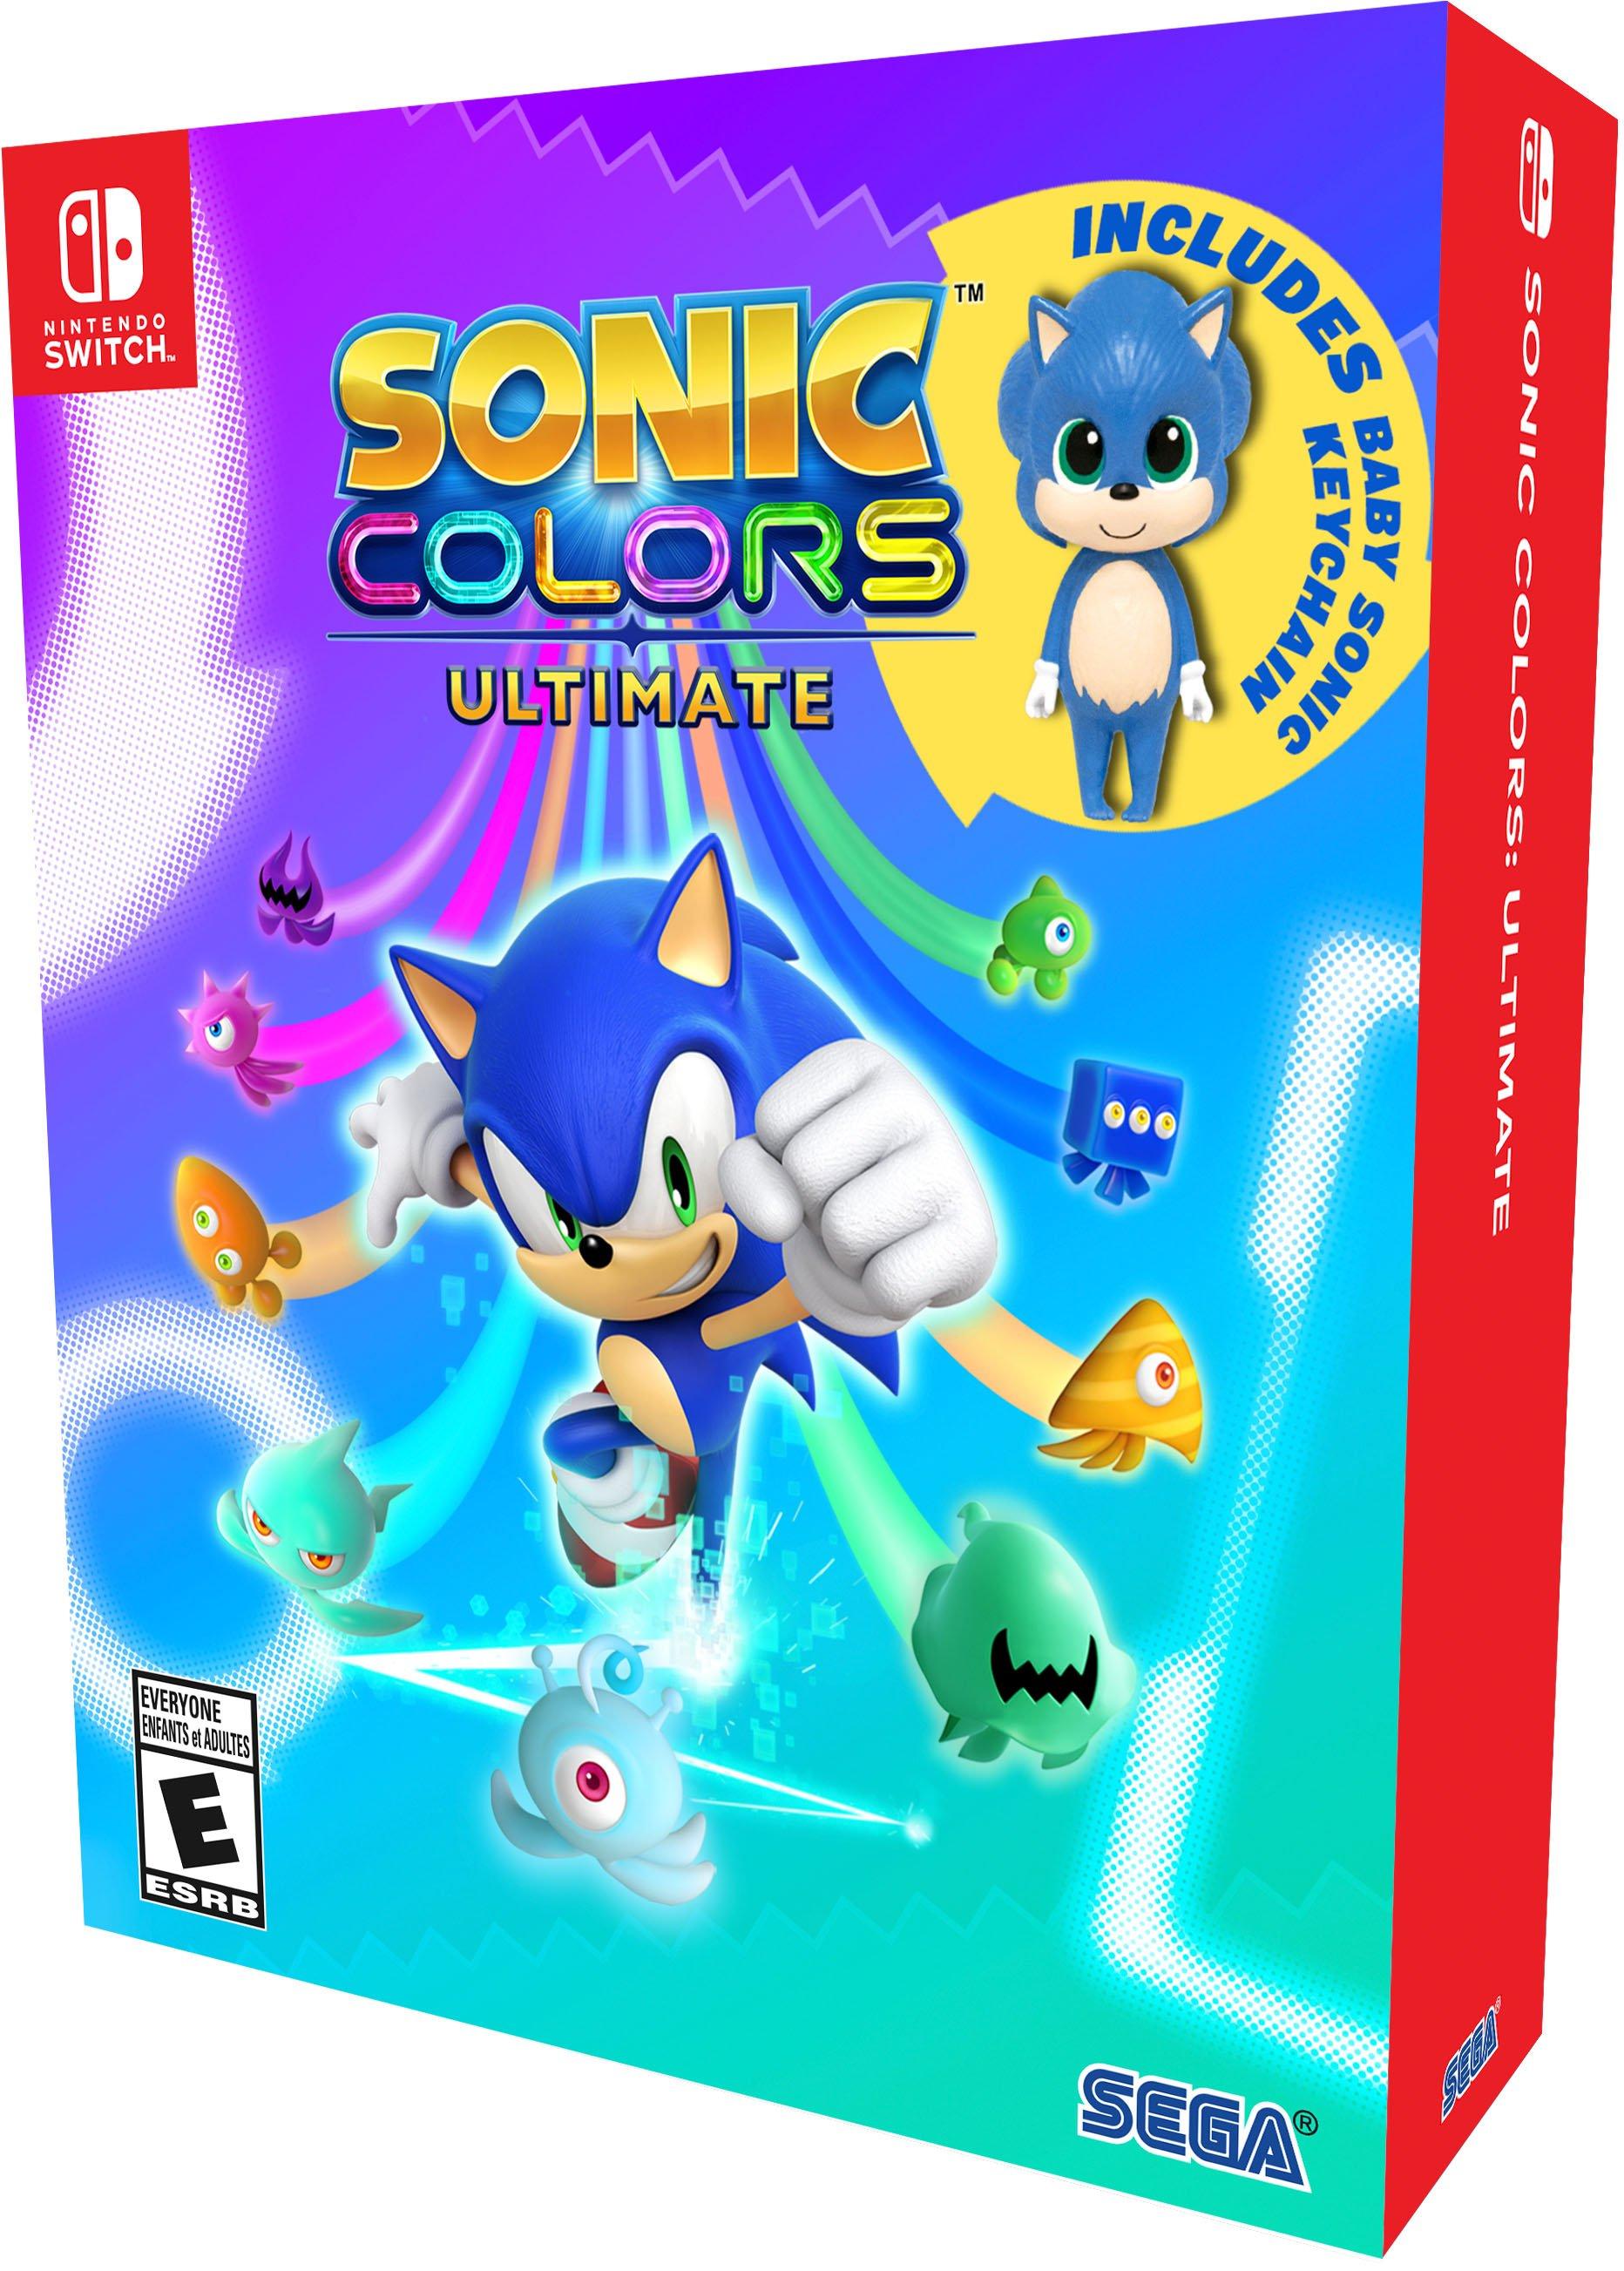 Sonic Colors: Ultimate Launch Edition (Nintendo Switch) + Free Baby Sonic Keychain $20 + Free S&H on $35+